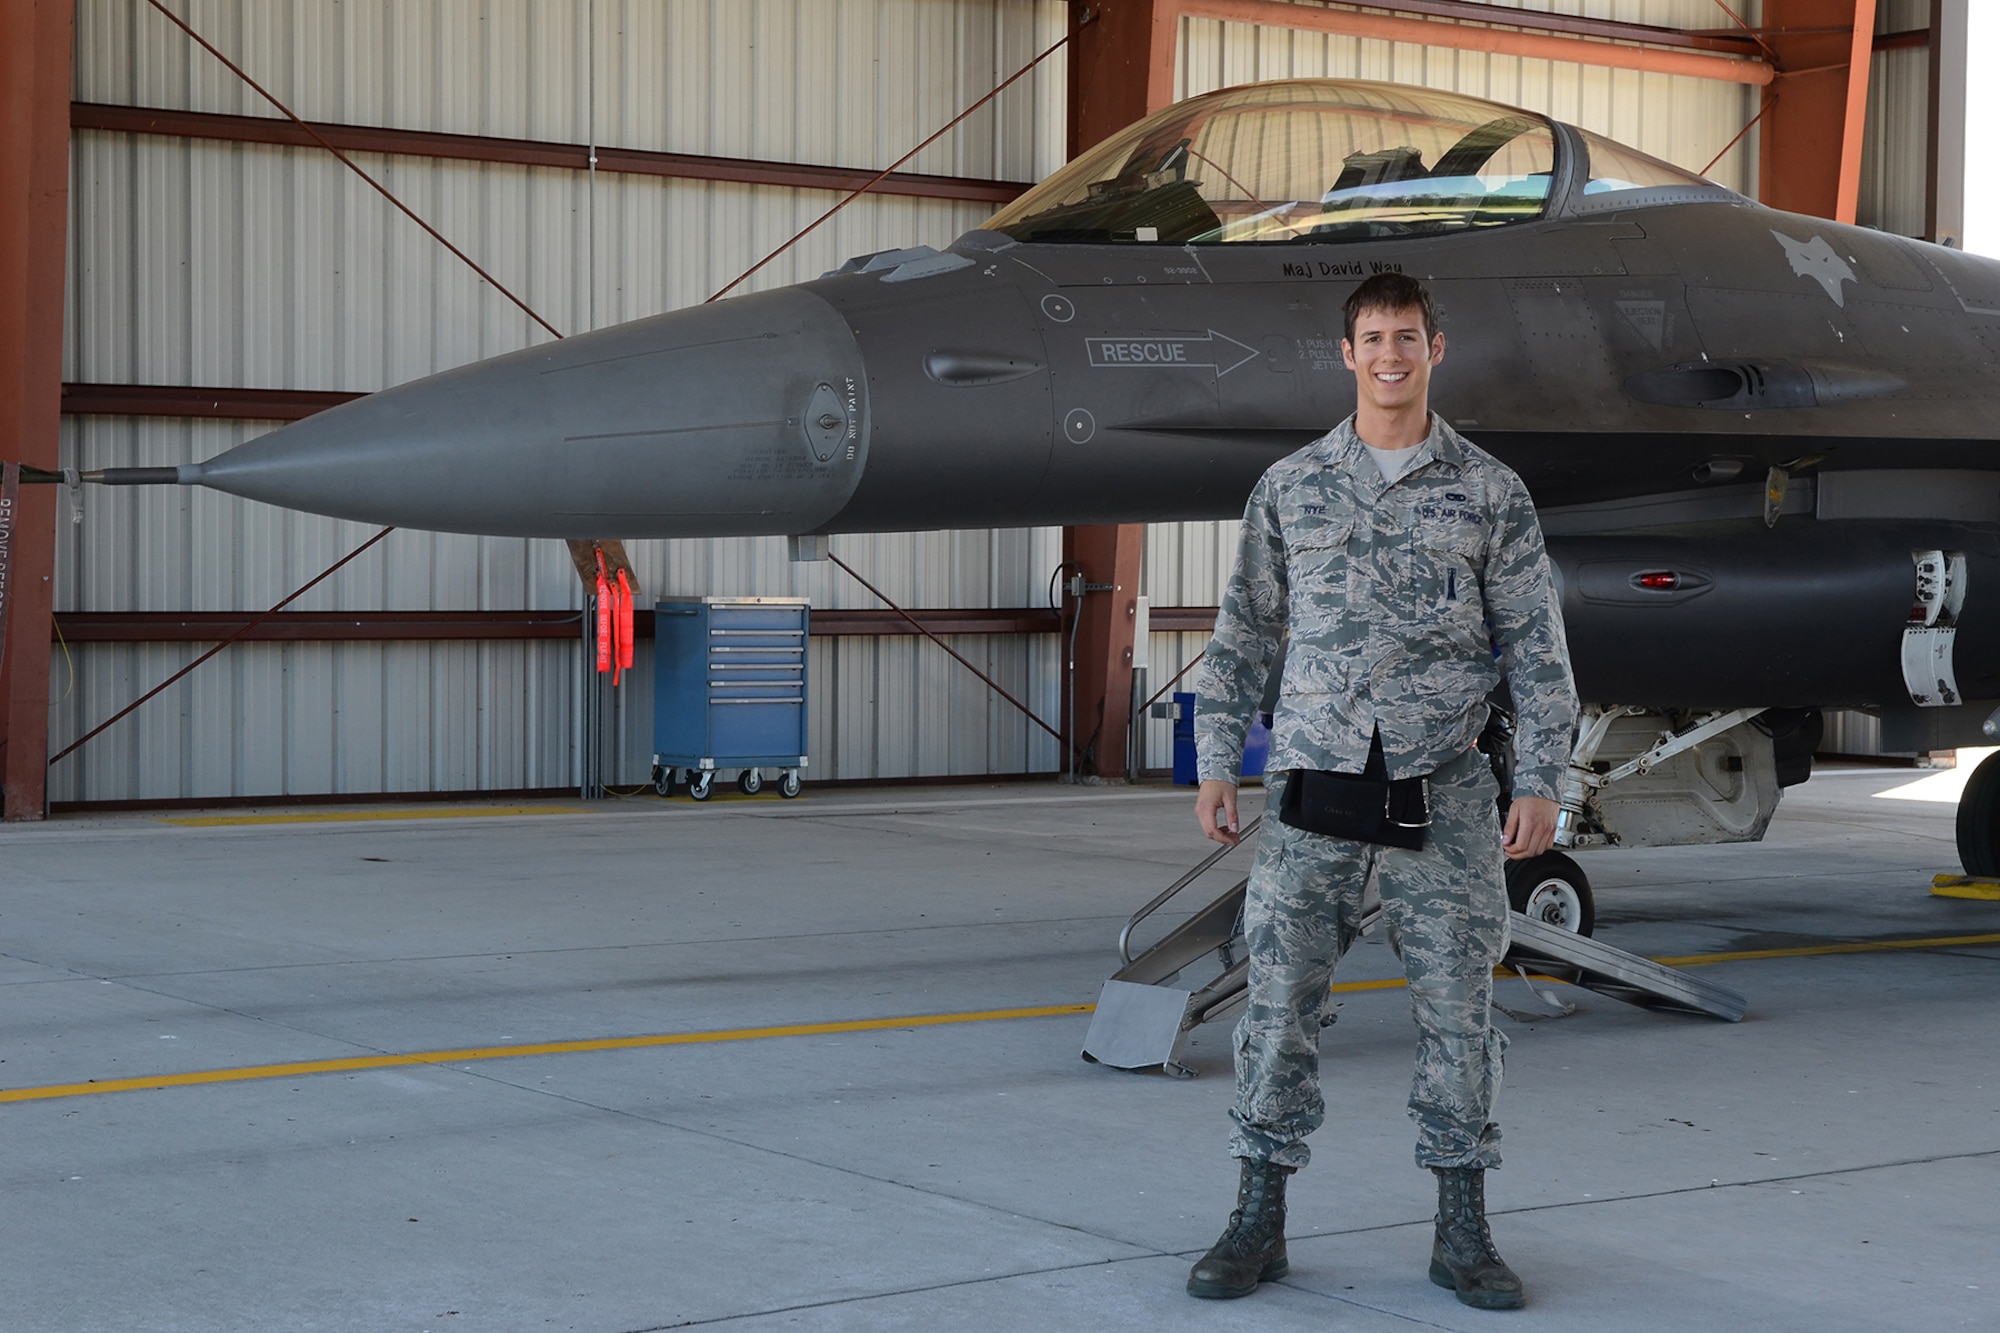 U.S. Air Force Senior Airman Curtis Nye, a weapons loader assigned to the South Carolina Air National Guard's 169th Maintenance Squadron, performs maintenance checks on an F-16 Fighting Falcon fighter jet at McEntire Joint National Guard Base, S.C., April 16, 2016. (U.S. Air National Guard photo by Senior Airman Ashleigh Pavelek)